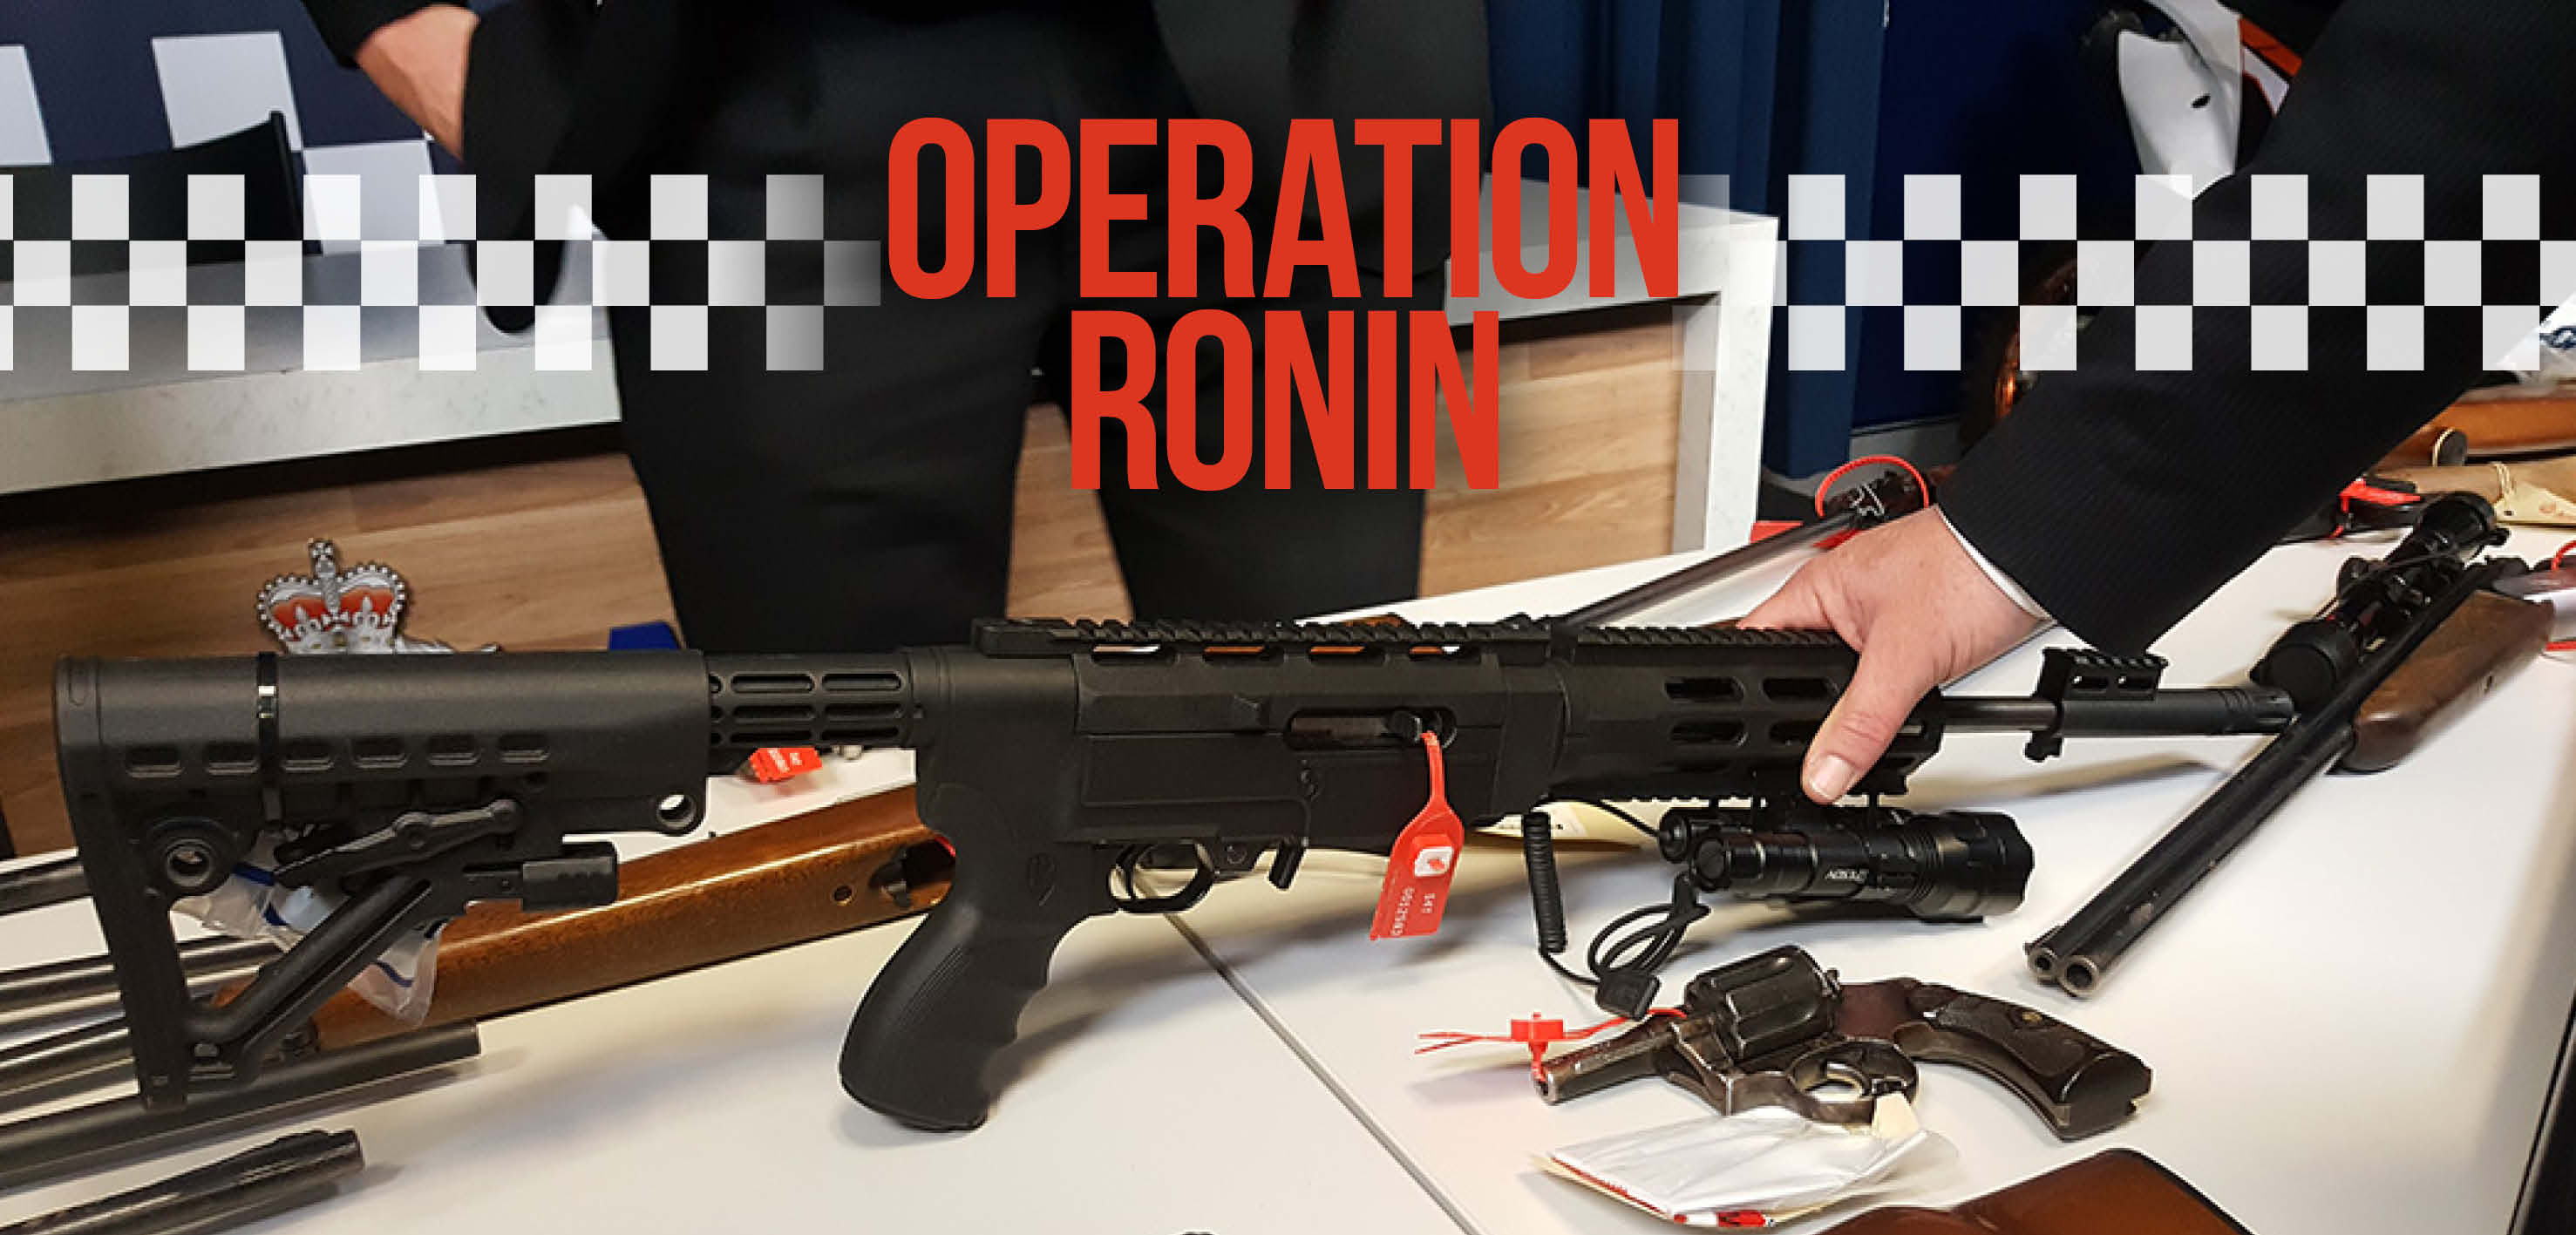 27 people face court following Operation Ronin